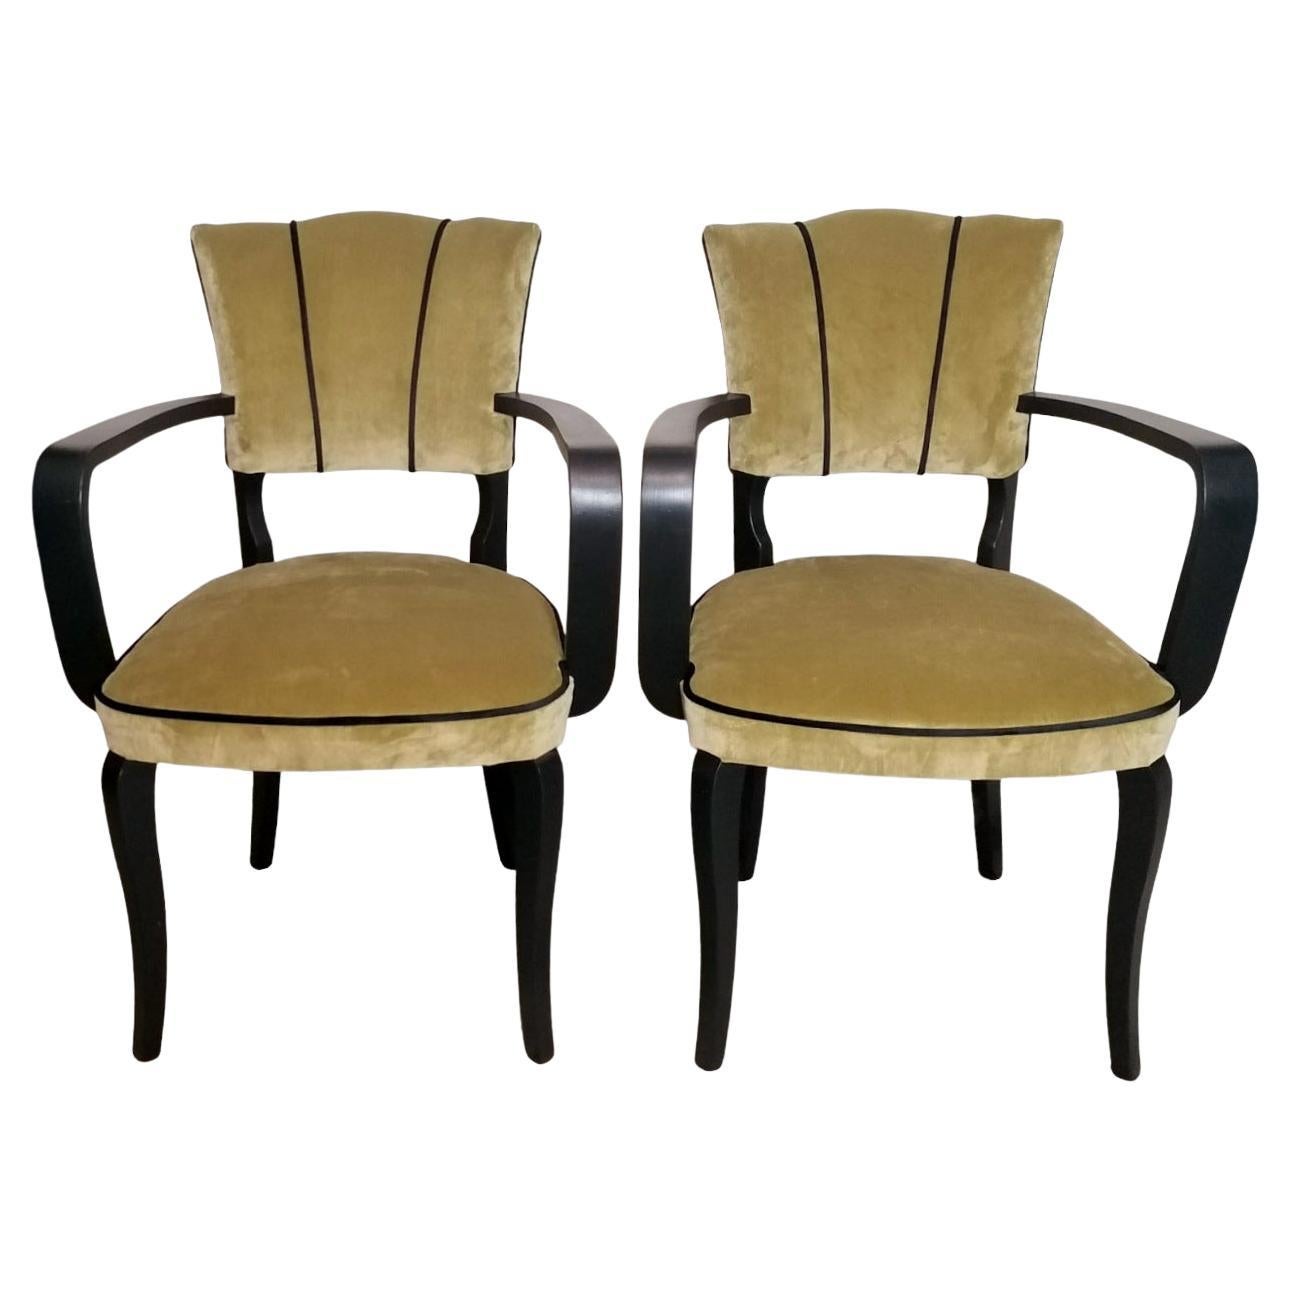 Pair Of French Chairs Model "Bridge" For Sale